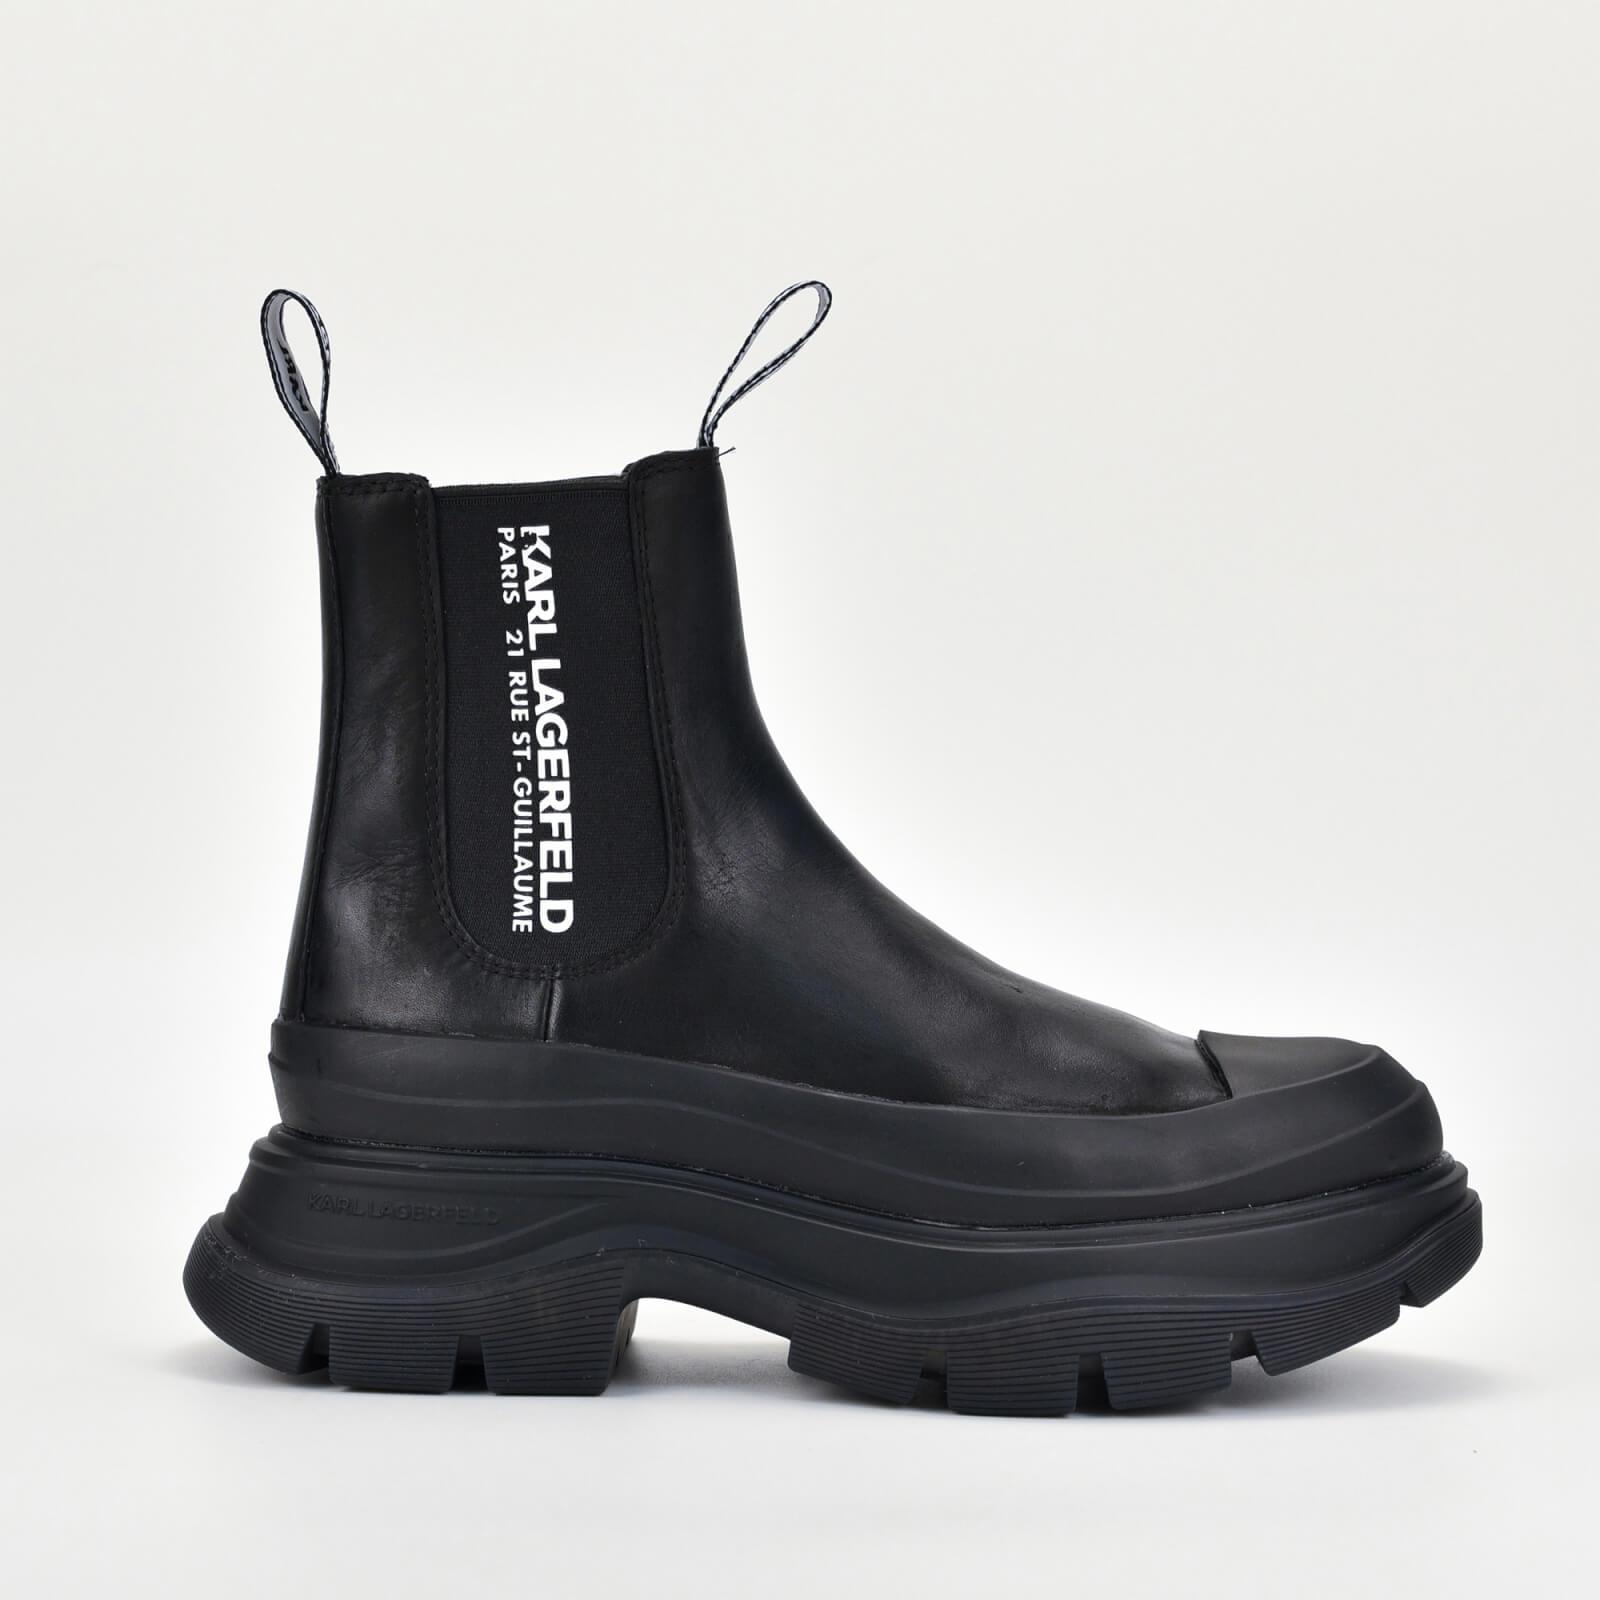 Karl Lagerfeld Luna Maison Leather Chelsea Boots in Black | Lyst